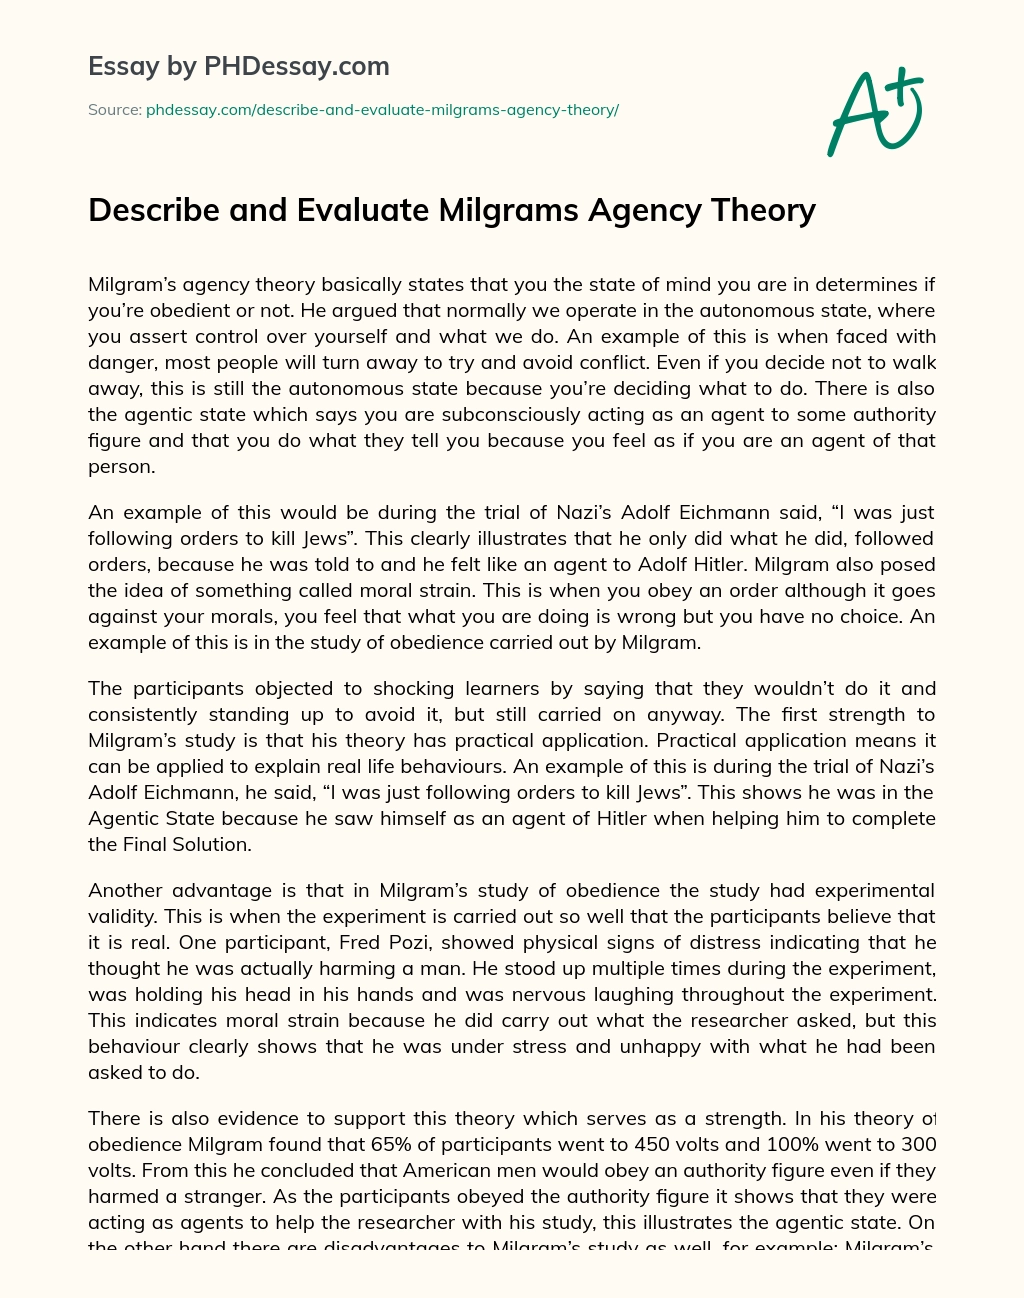 Describe and Evaluate Milgrams Agency Theory essay